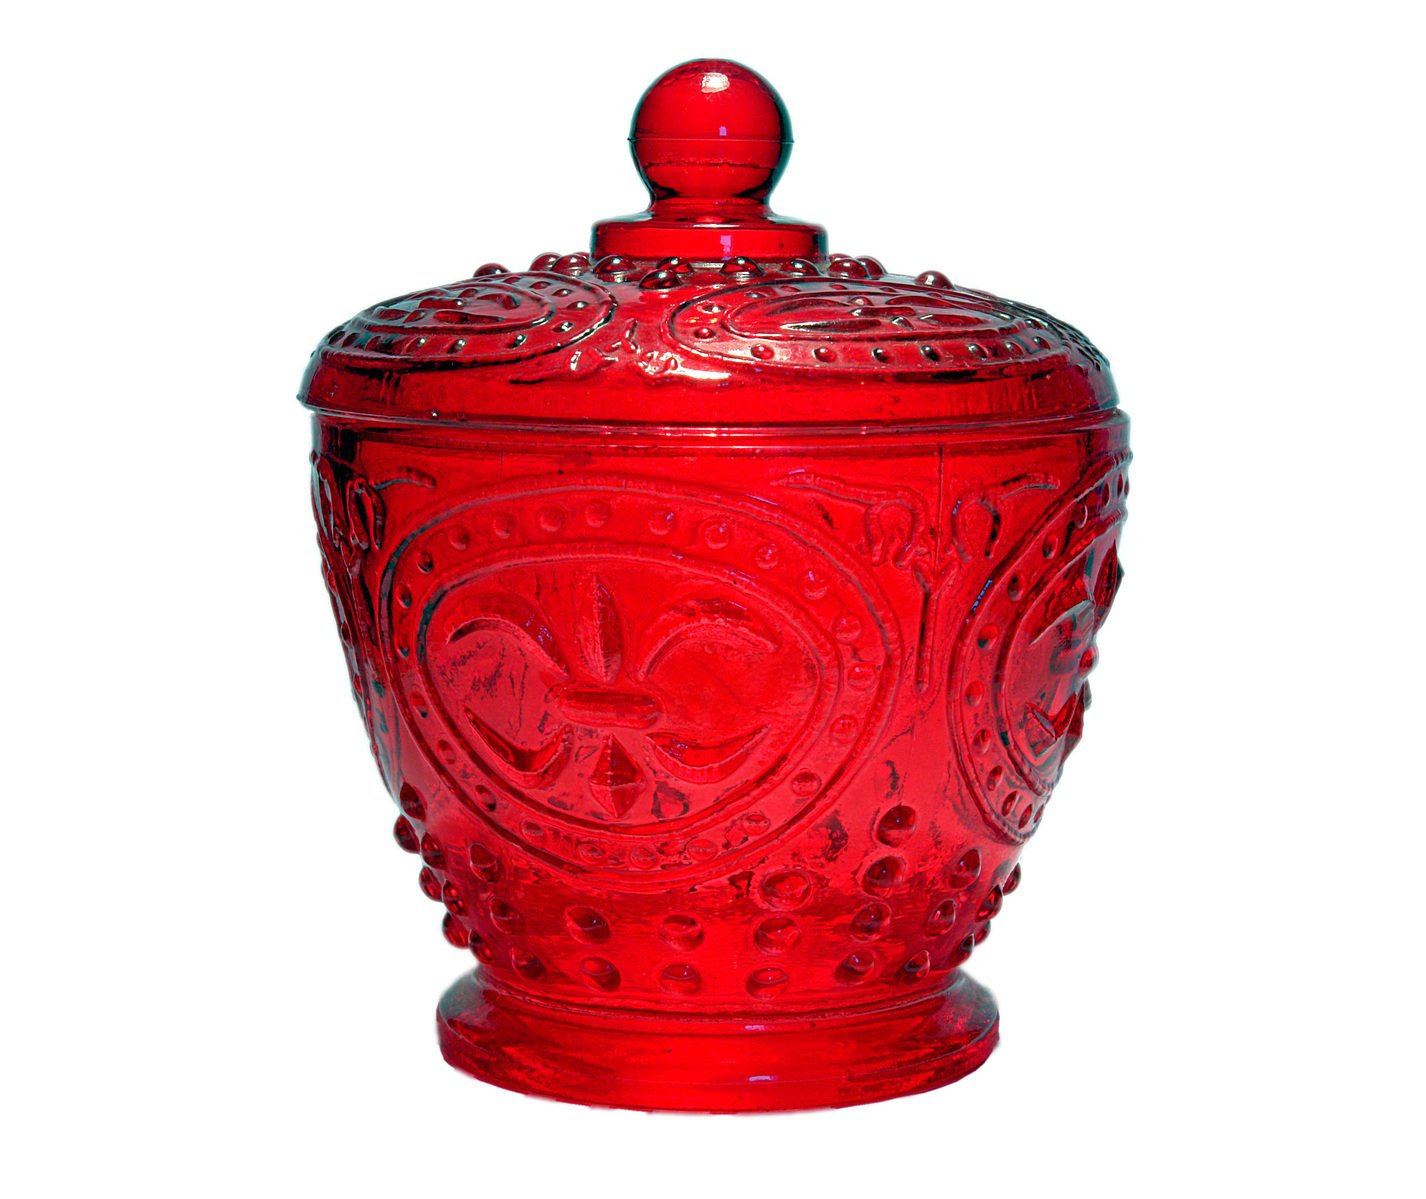 an ornate red glass jar with a lid on a white background